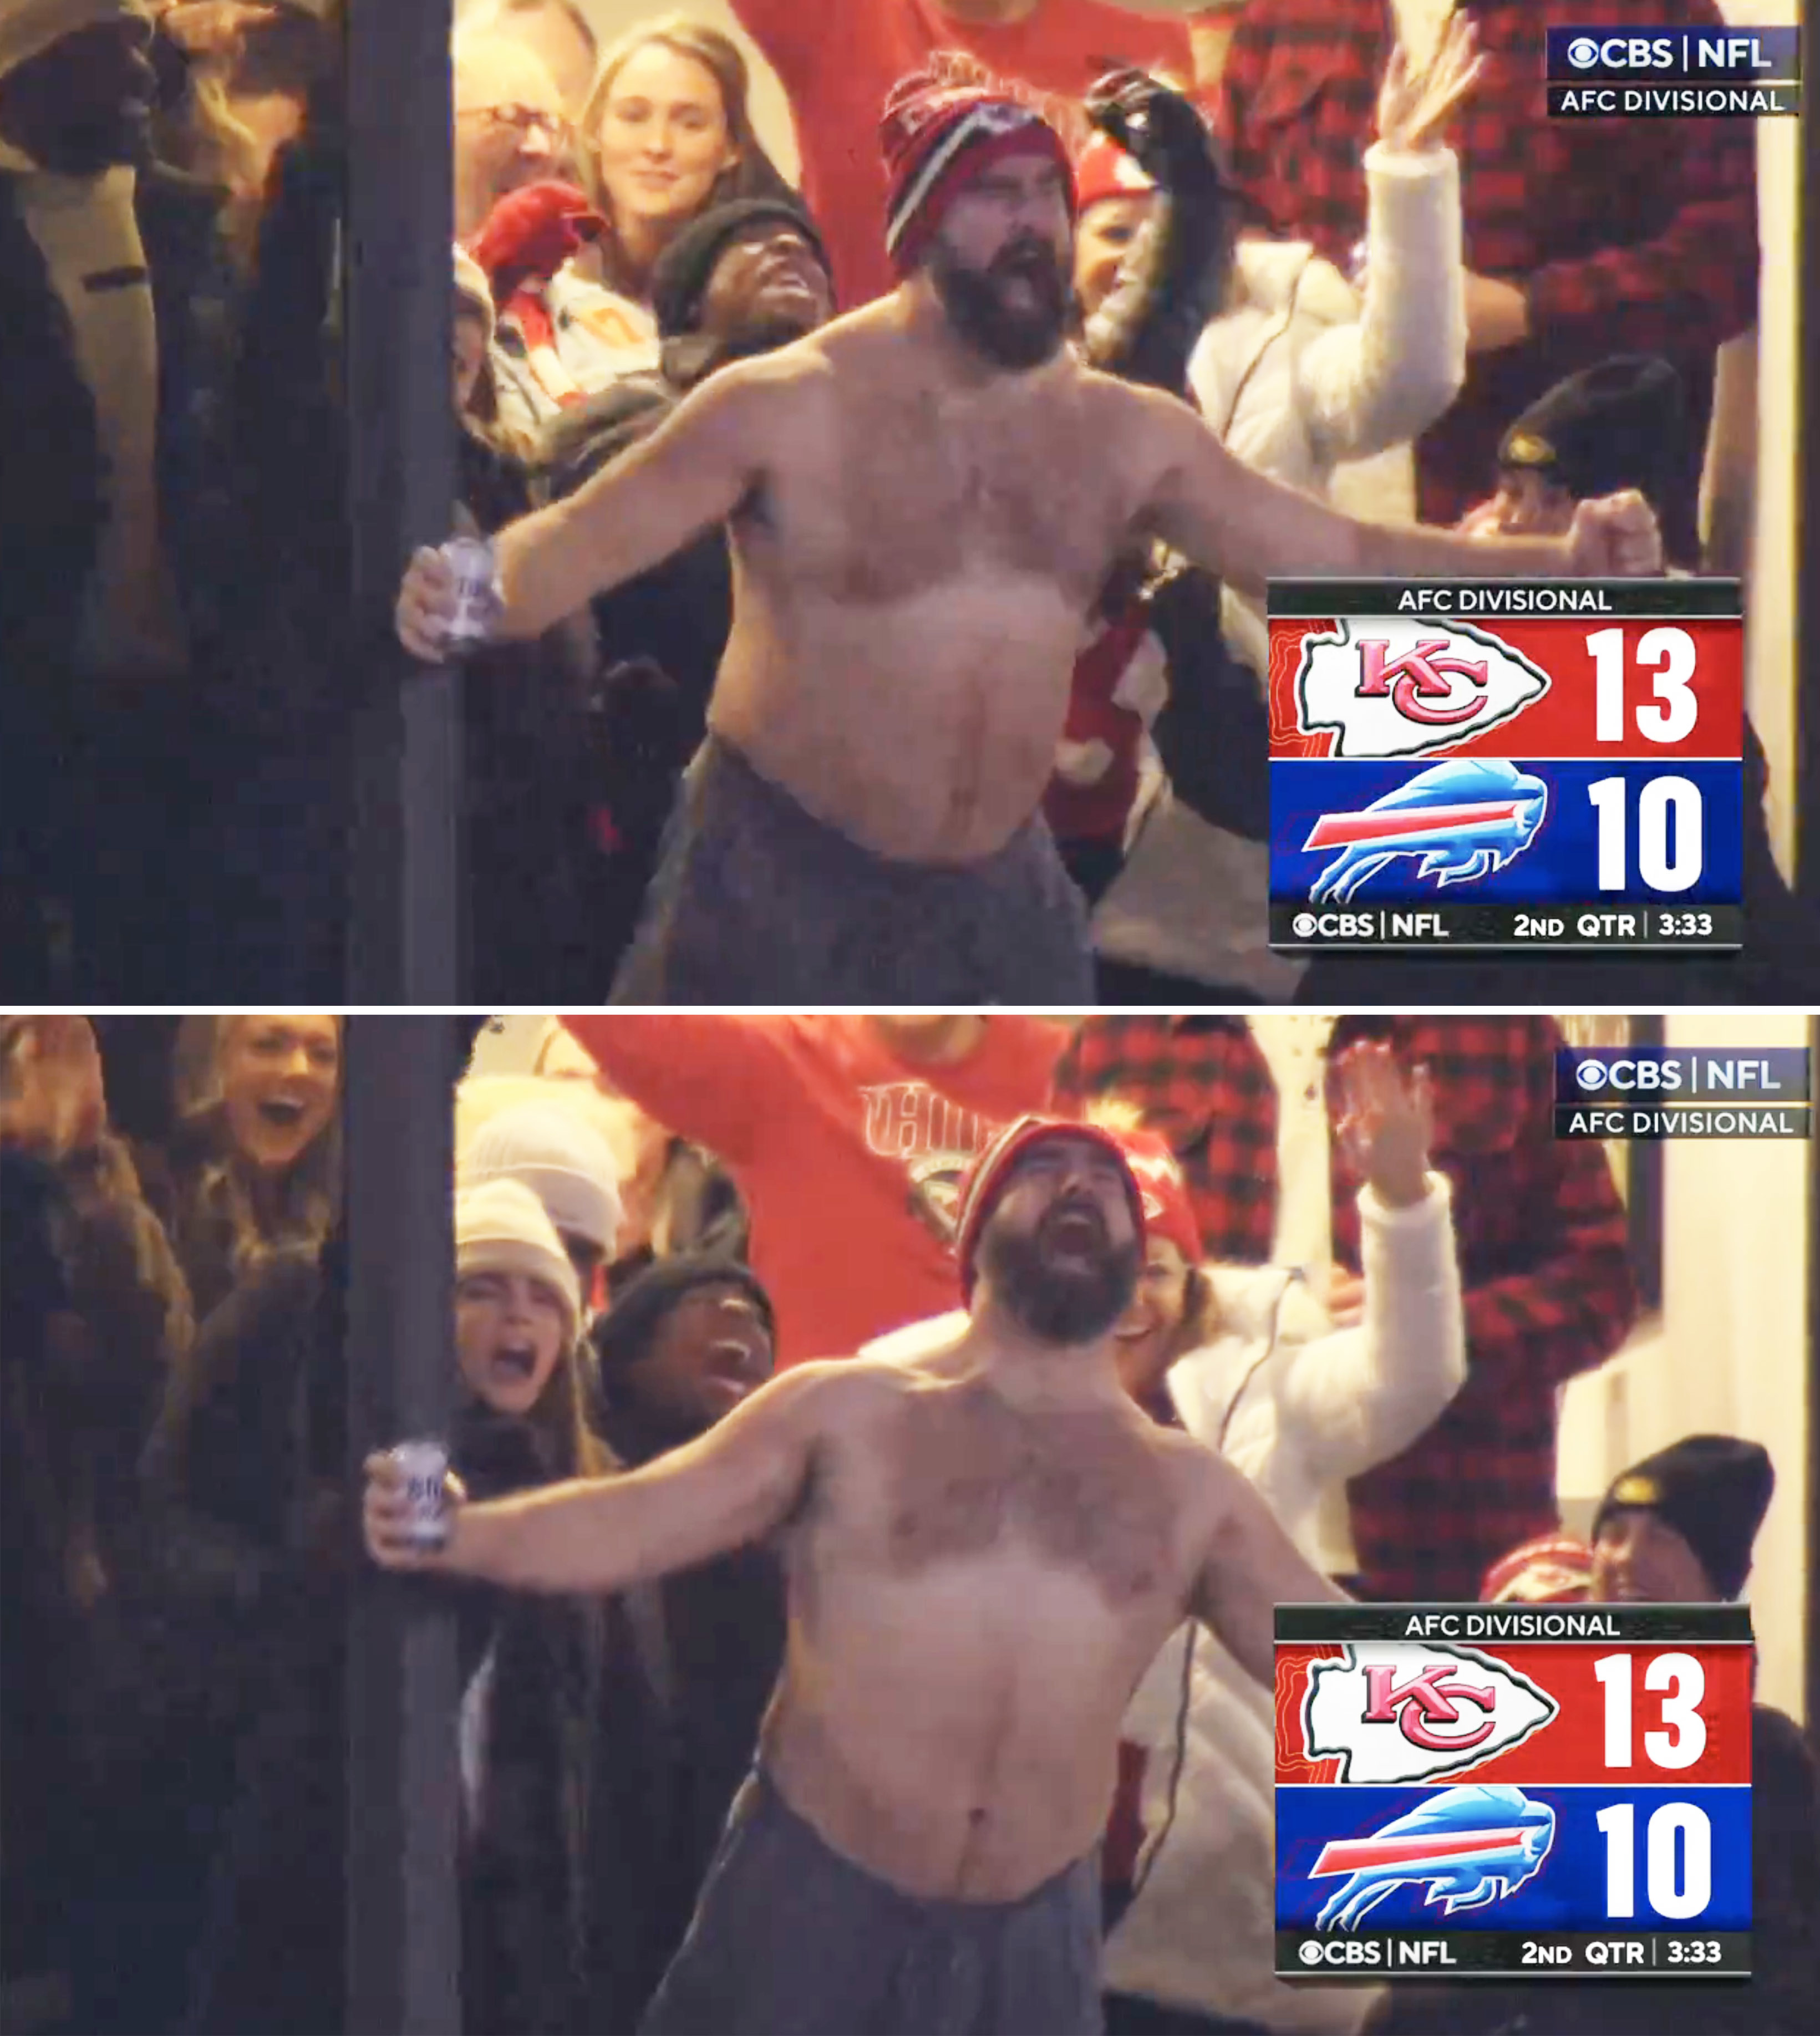 jason cheering with his shirt off and holding a beer